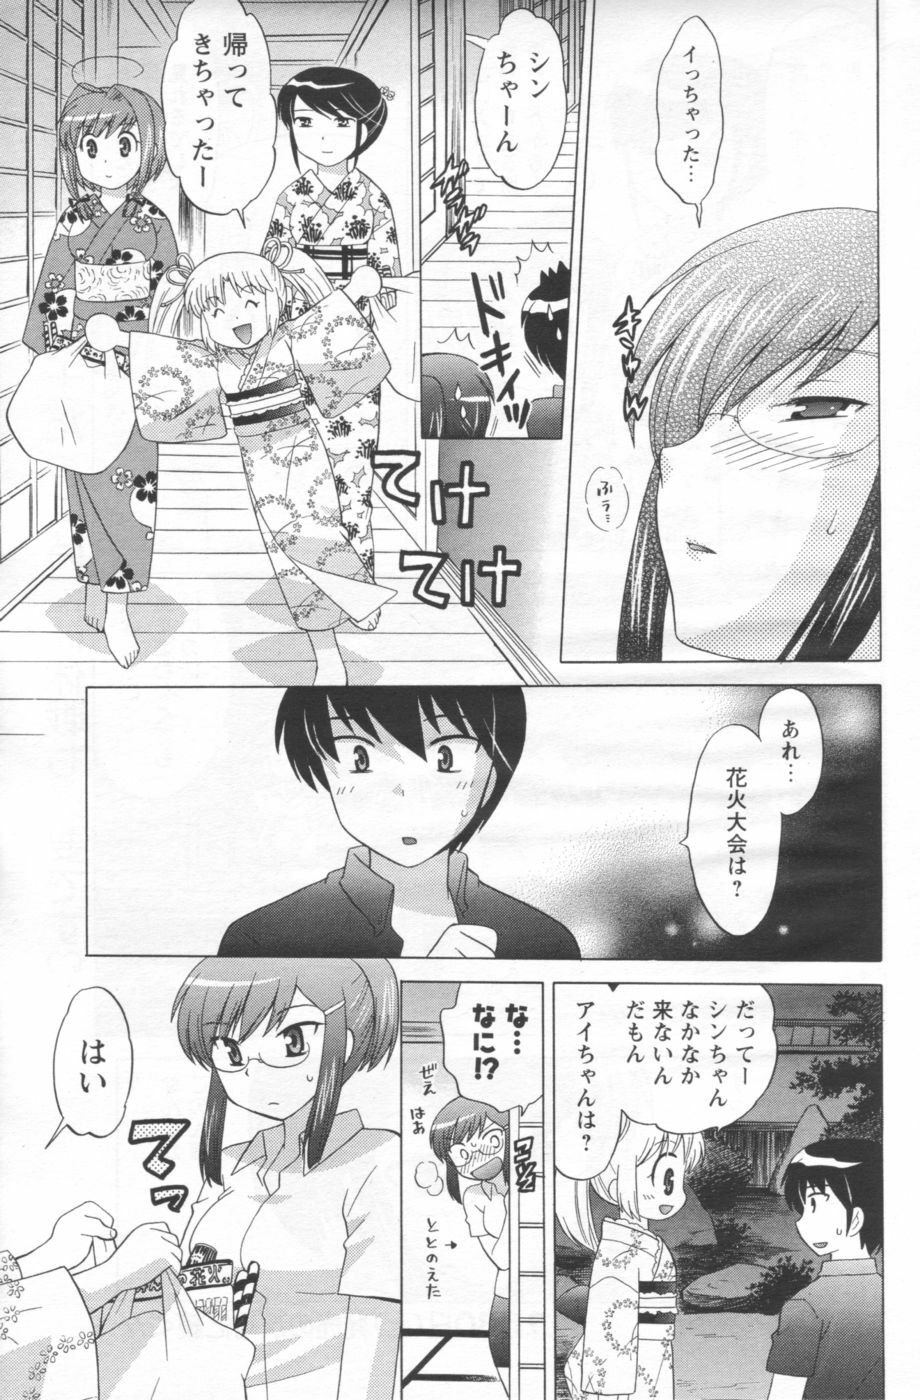 [Anthology] Men's YOUNG 2006-10 page 23 full